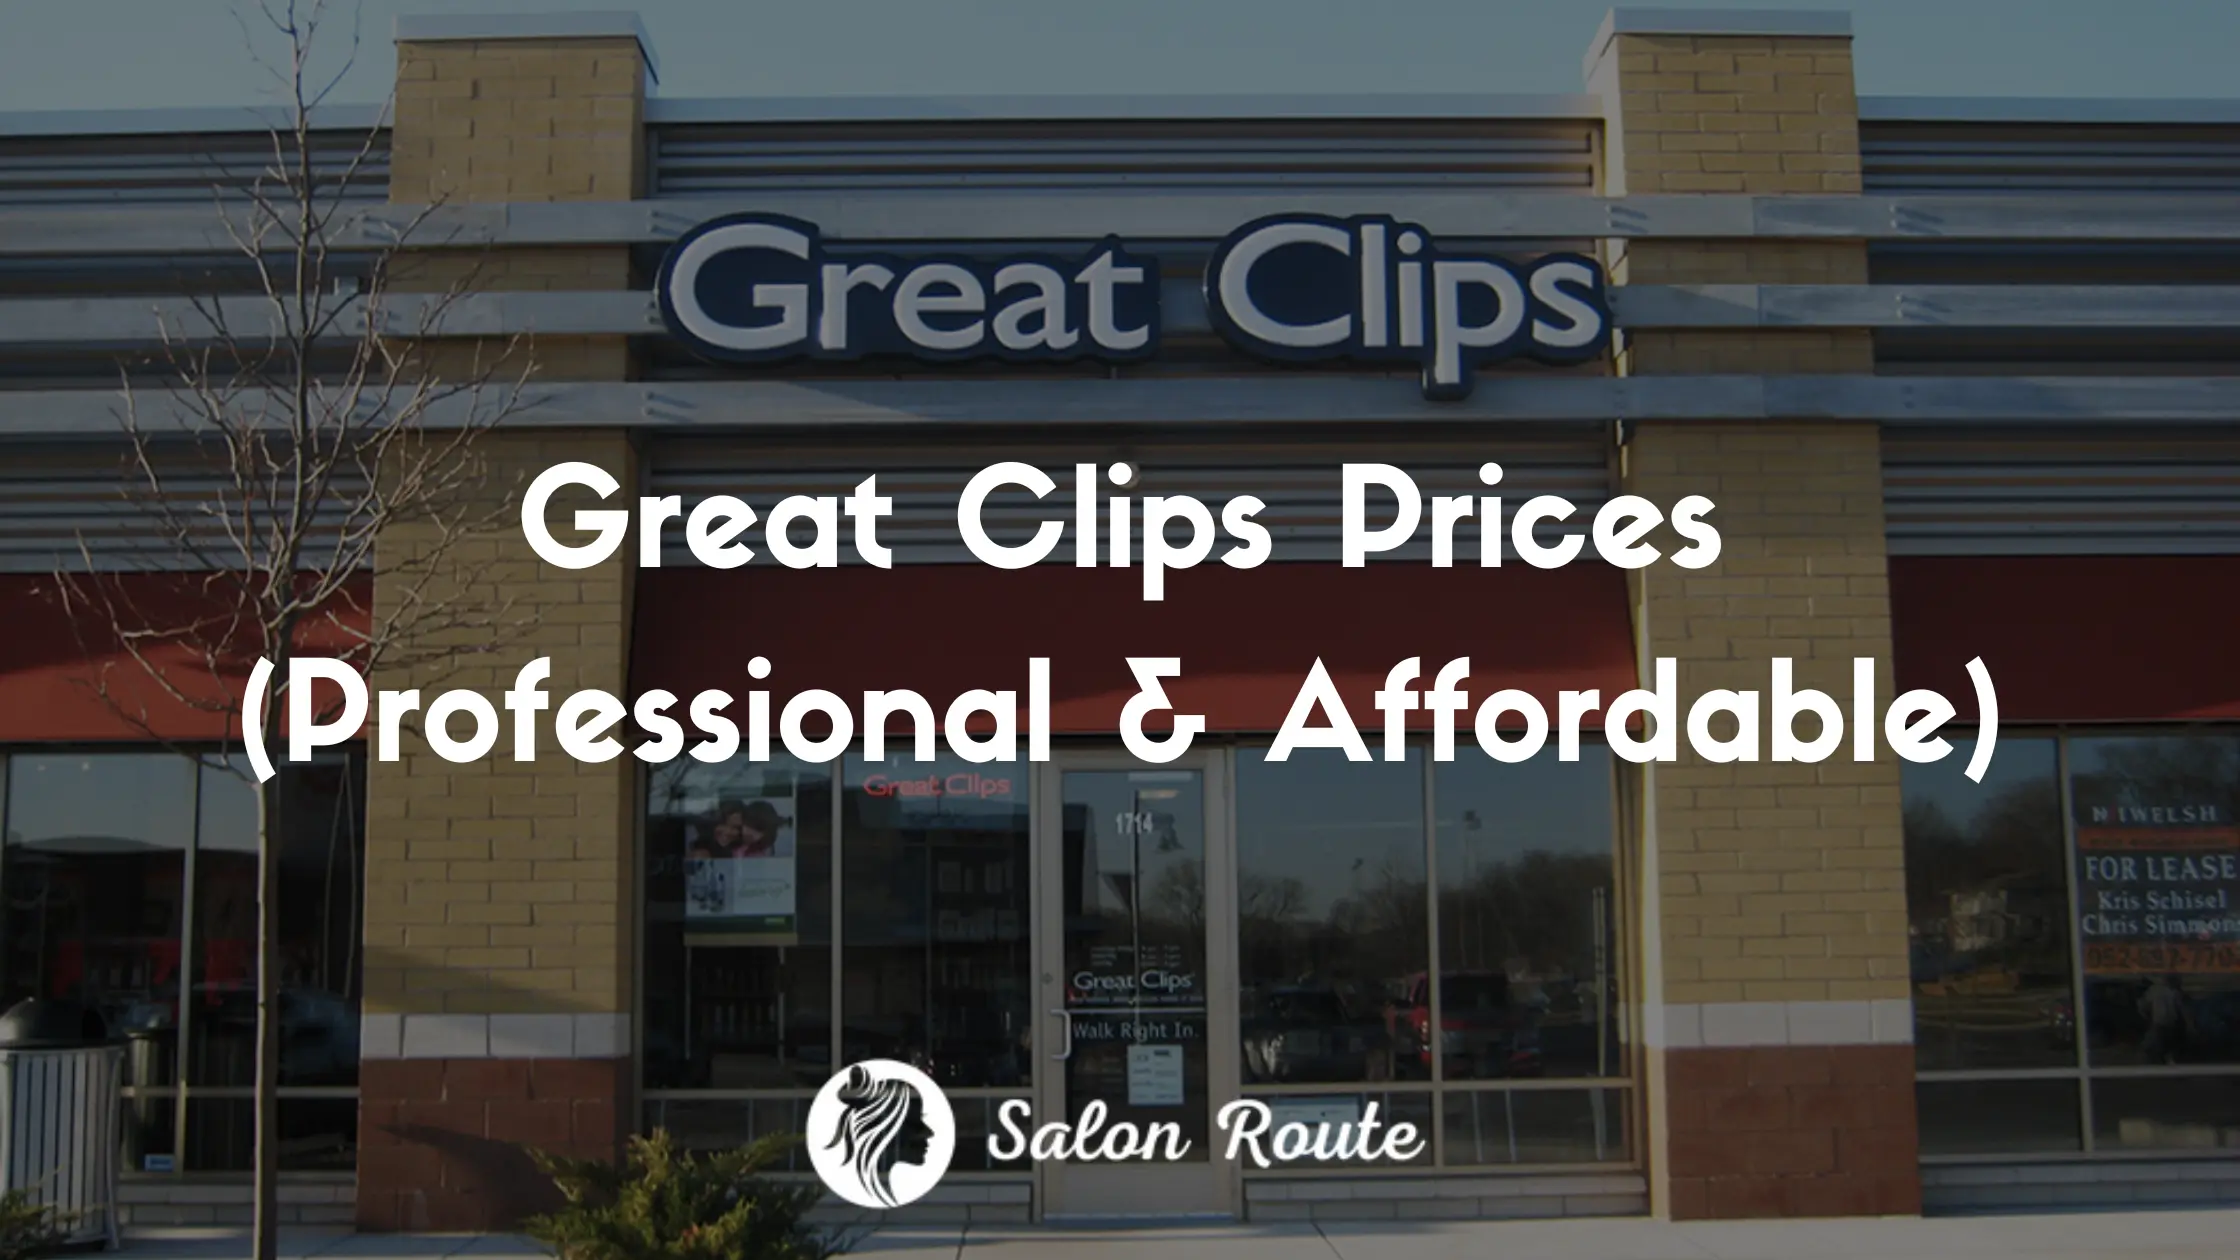 Great Clips Prices (Professional & Affordable)